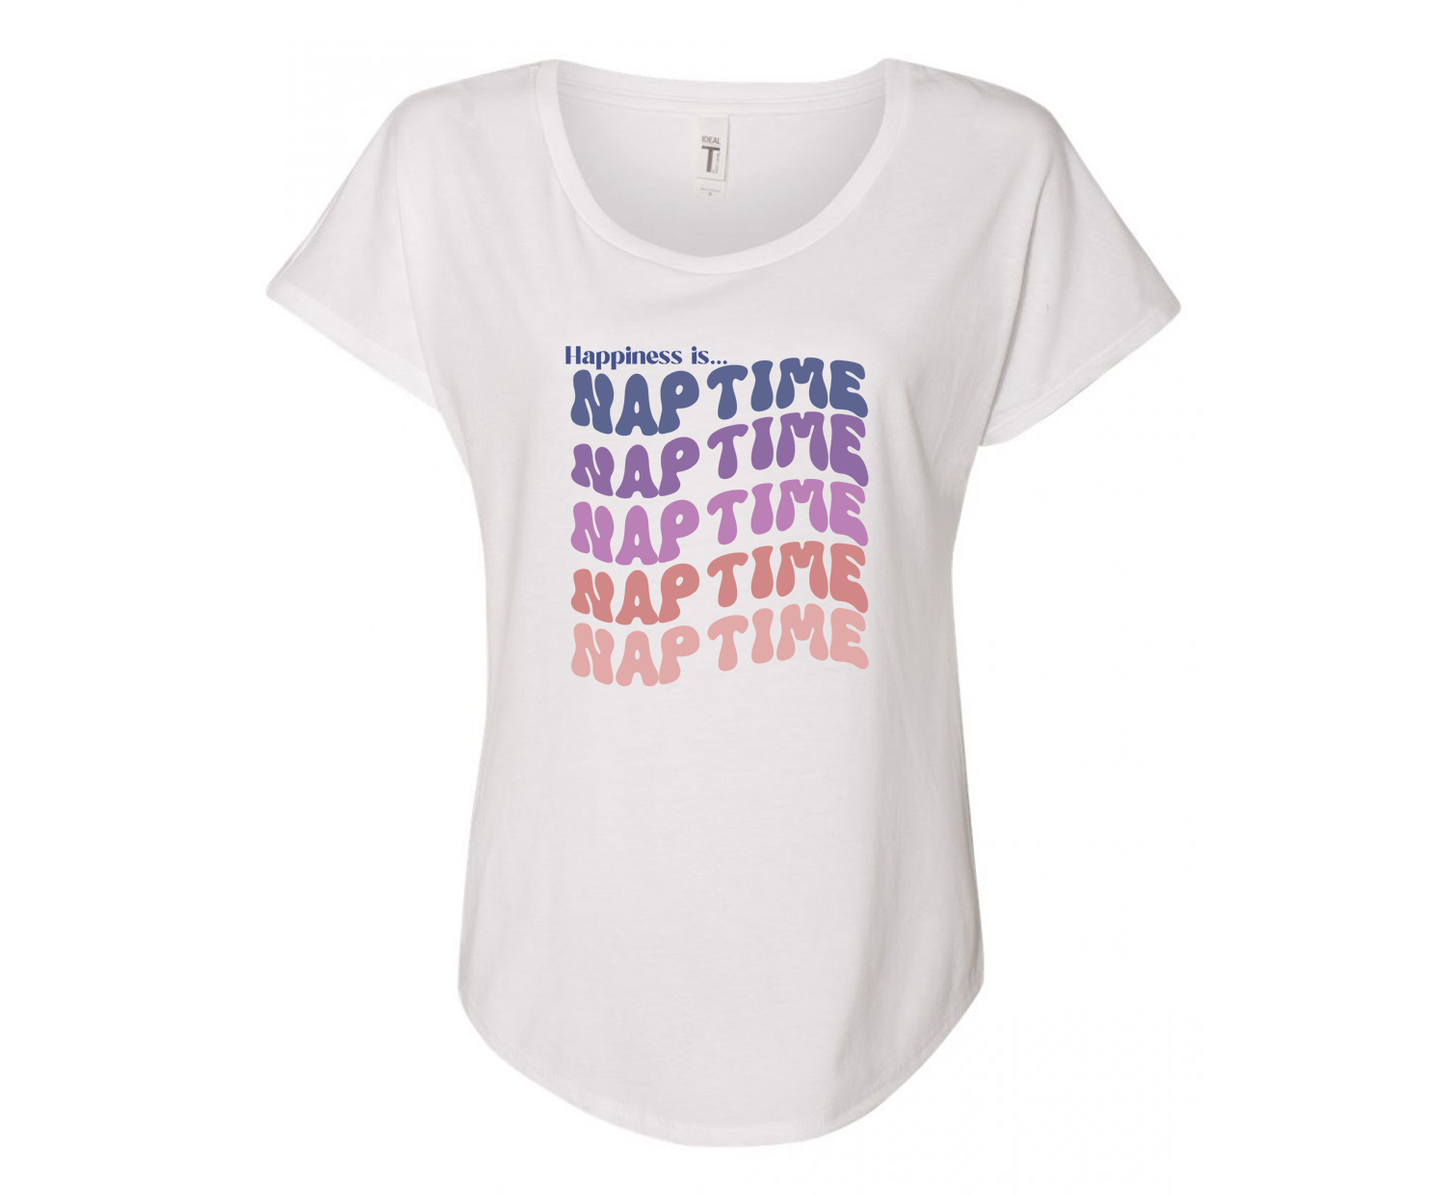 Happiness is Nap Time Ladies Tee Shirt - In White & Grey